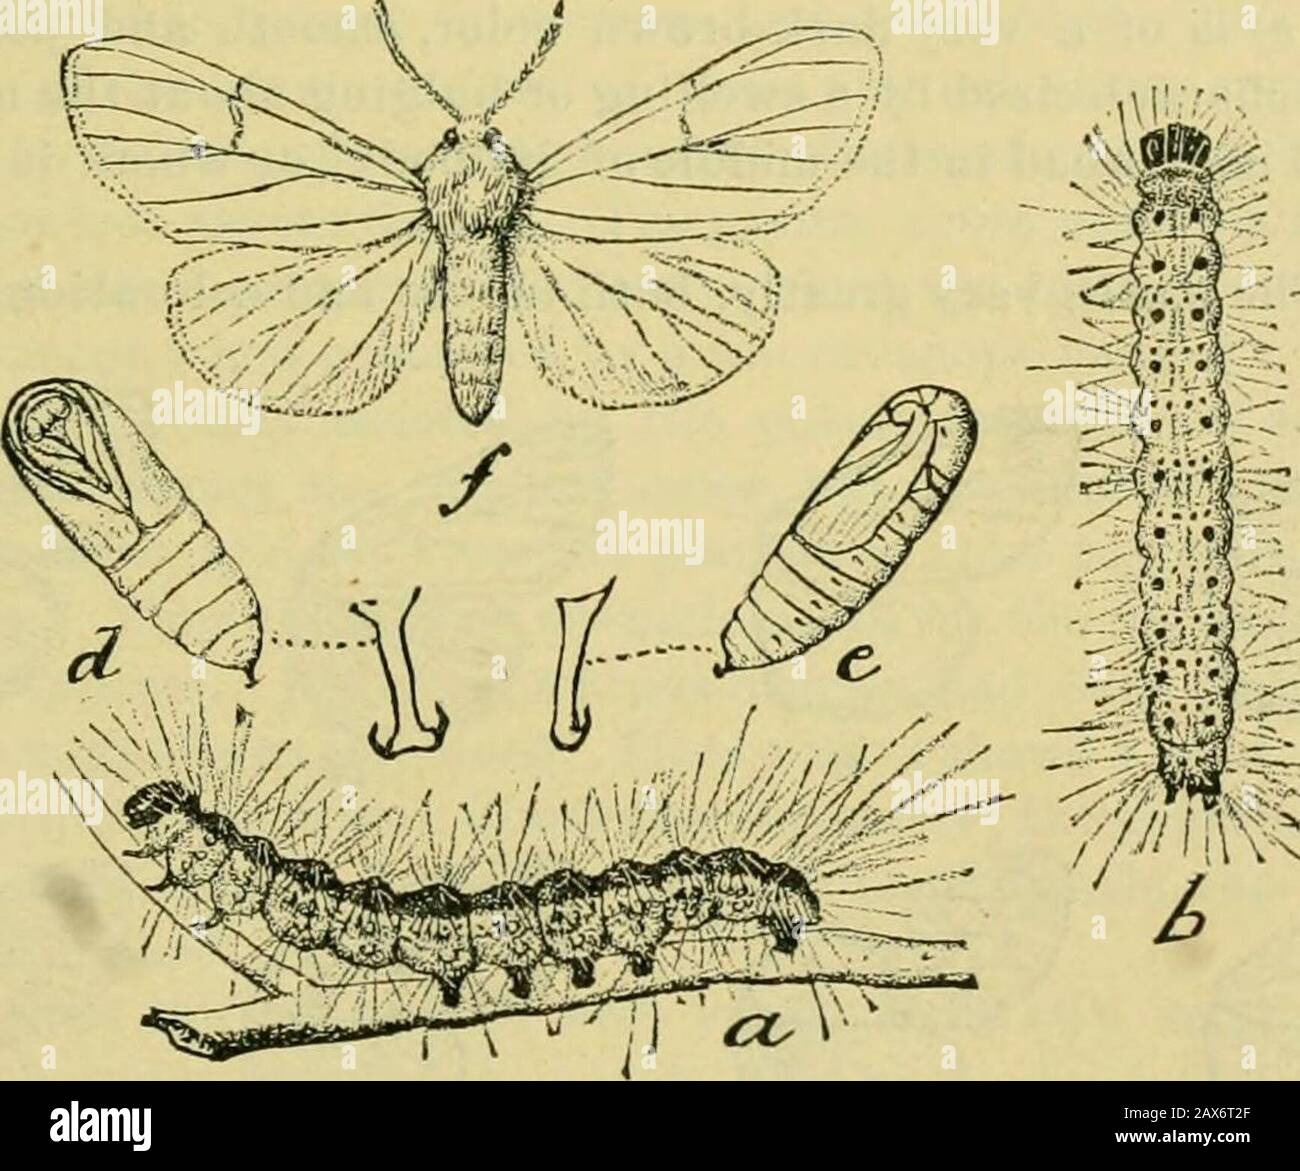 Fifth report of the United States Entomological Commission, being a revised and enlarged edition of Bulletin no7, on insects injurious to forest and shade trees . d less regularpatches, so that at least 500 eggs may be considered as the real number producedby a single individual. The egg, measuring 0.4°™, is of a bright golden-yellowcolor, quite globular, and ornamented by numerous regular pits, which give it undera magnifying lens the appearauce of a beautiful golden thimble. As the eggs ap-proach the time of hatching this color disappears and gives place to a dull leaden hue. The interval be Stock Photo